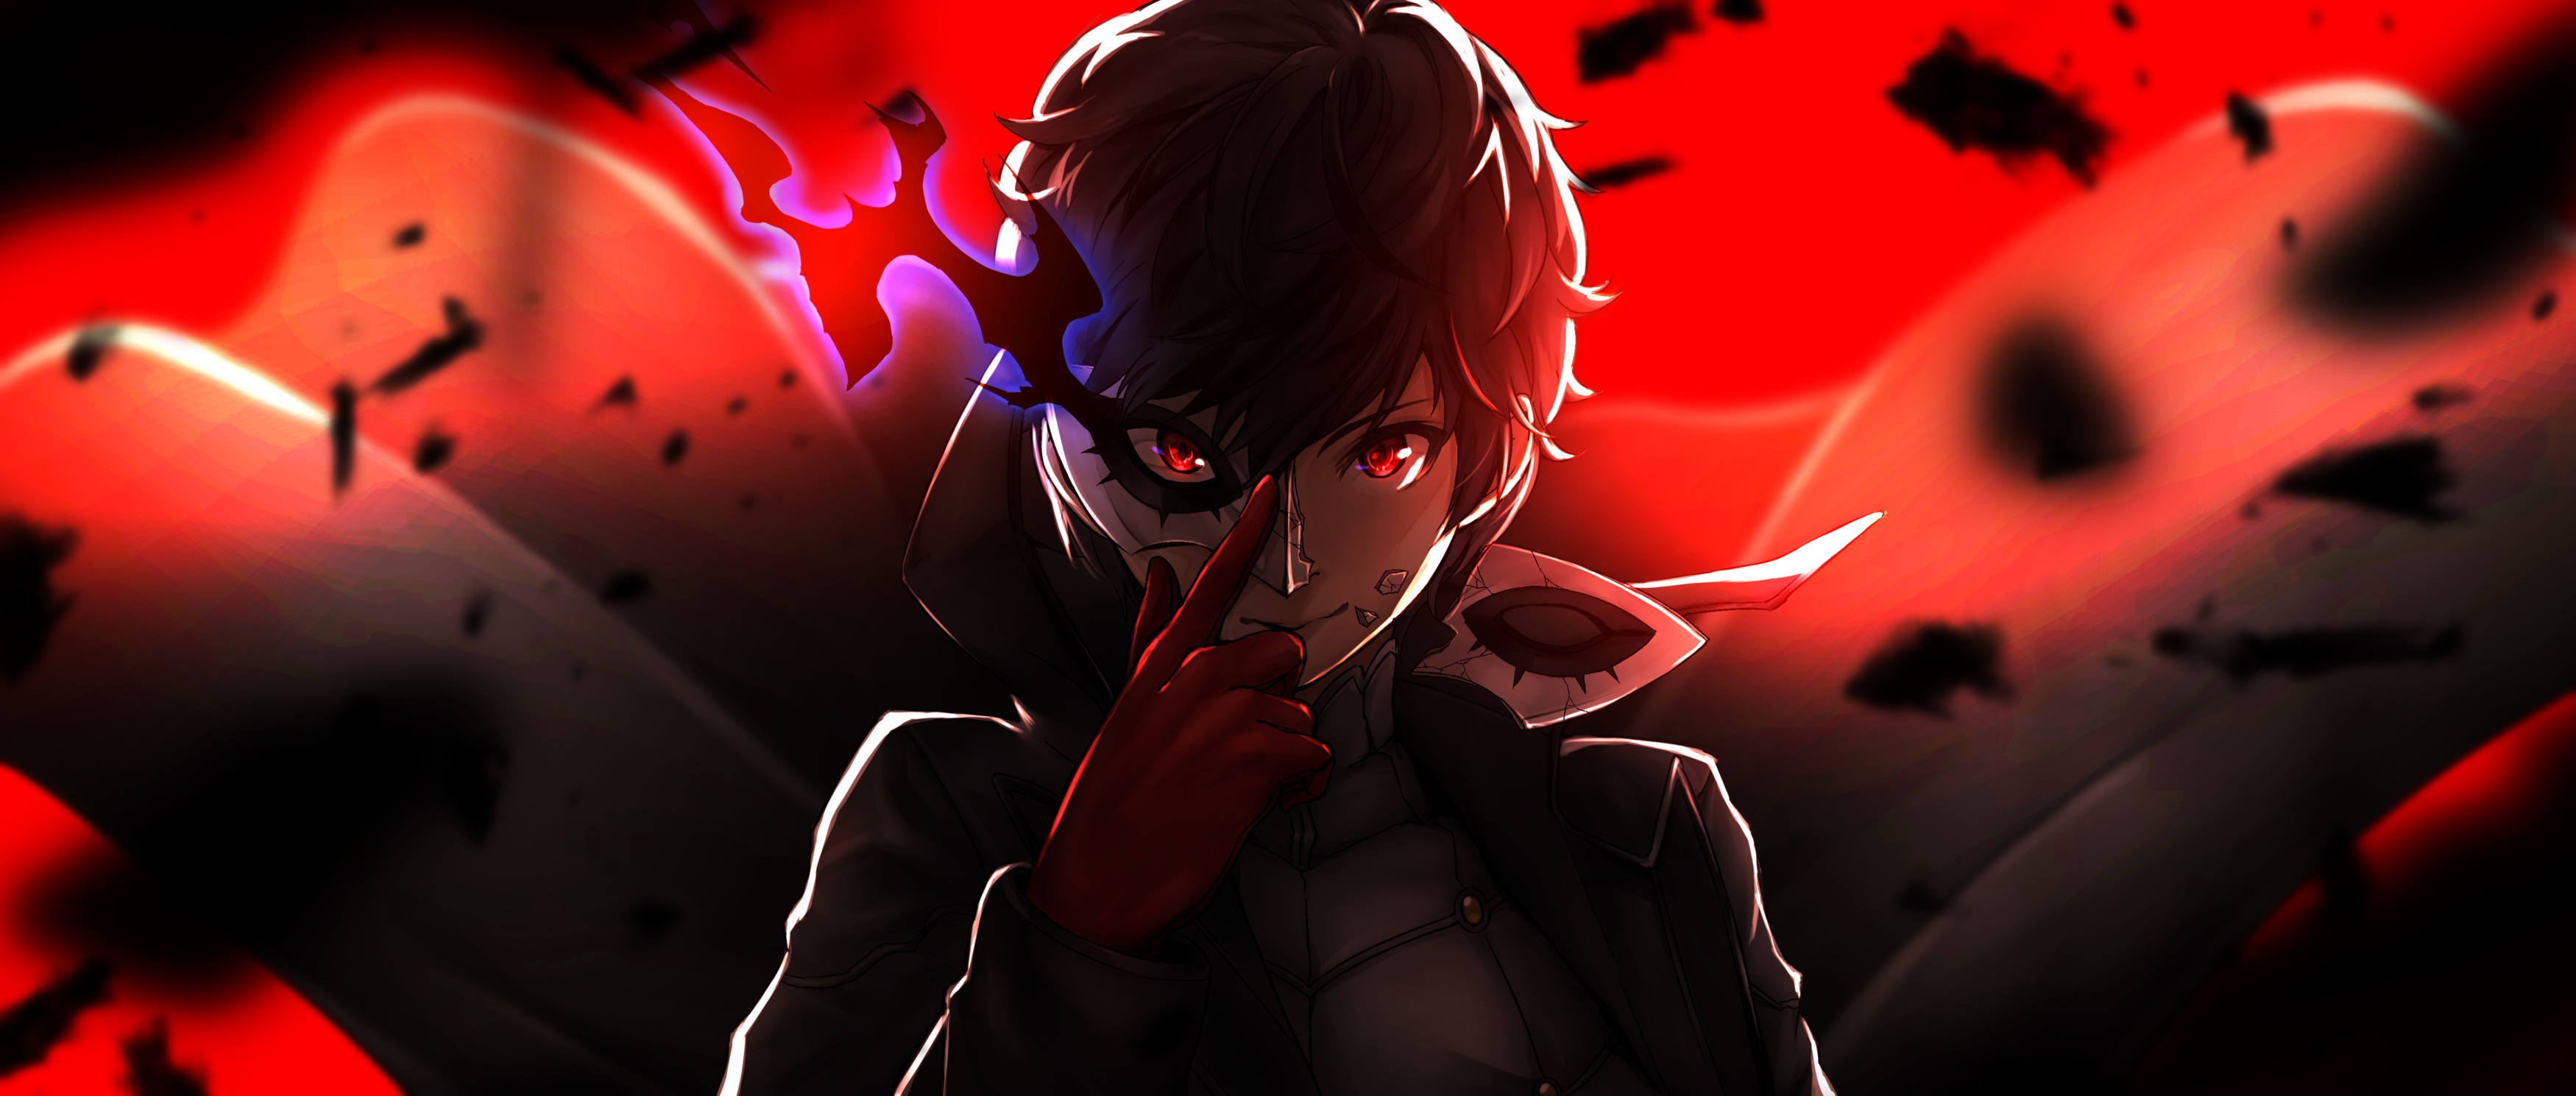 Persona 5 Protagonist Persona 5 Video Games Video Game Art Persona Series 3500x1489